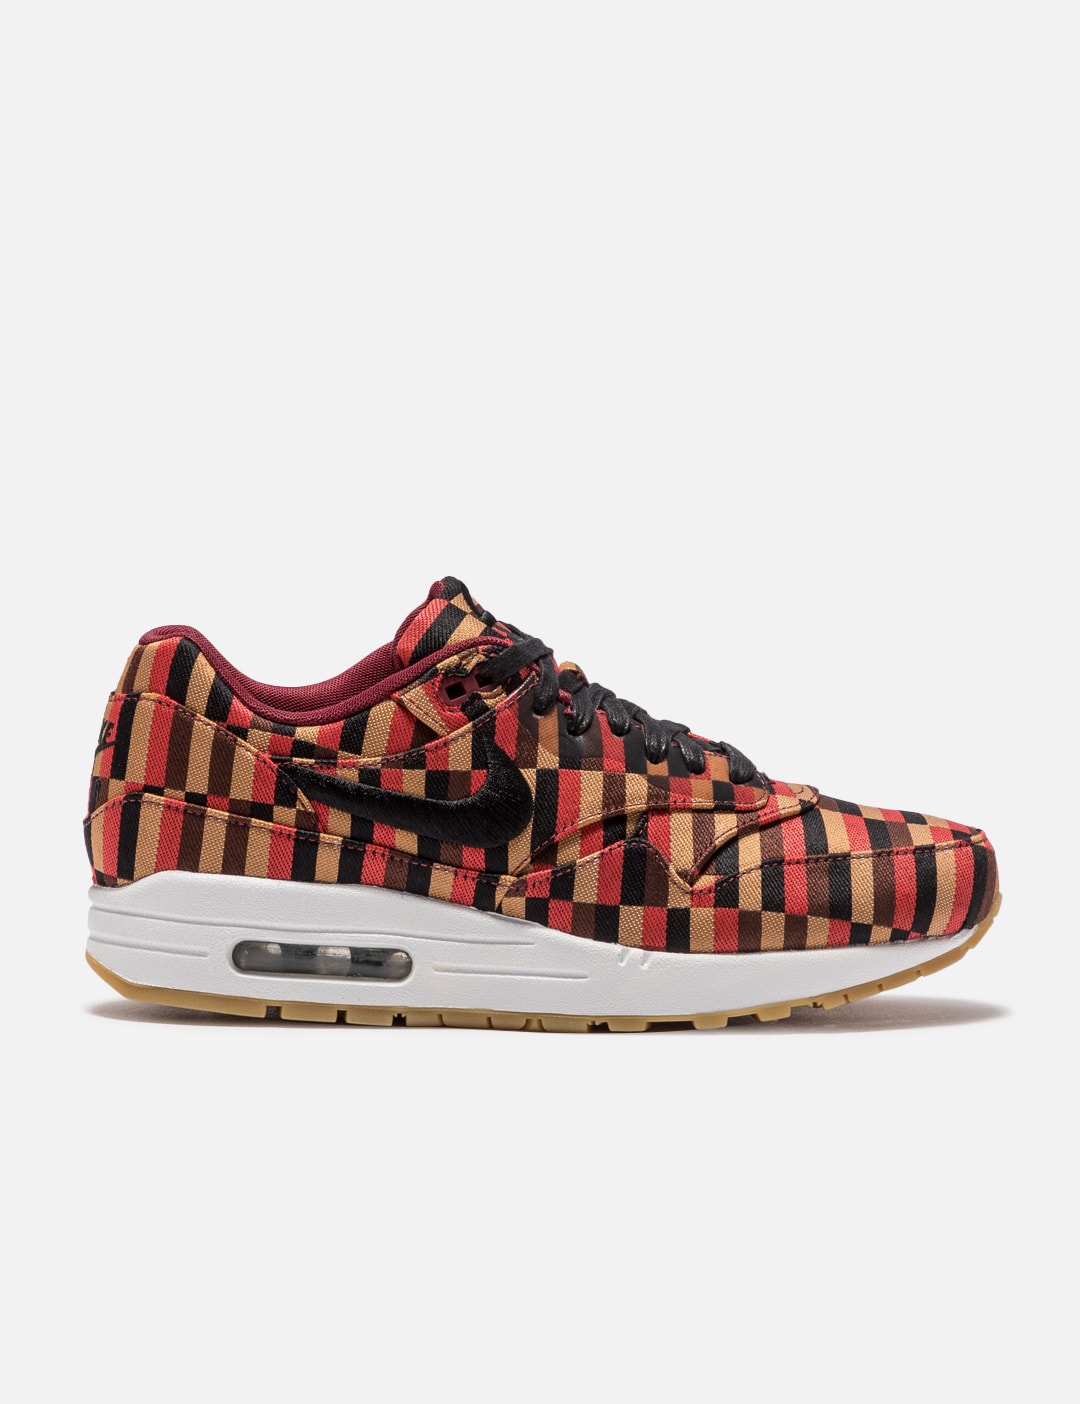 - NIKE X LONDON UNDERGROUND AIR MAX WOVEN SP | HBX - Globally Curated Fashion and Lifestyle by